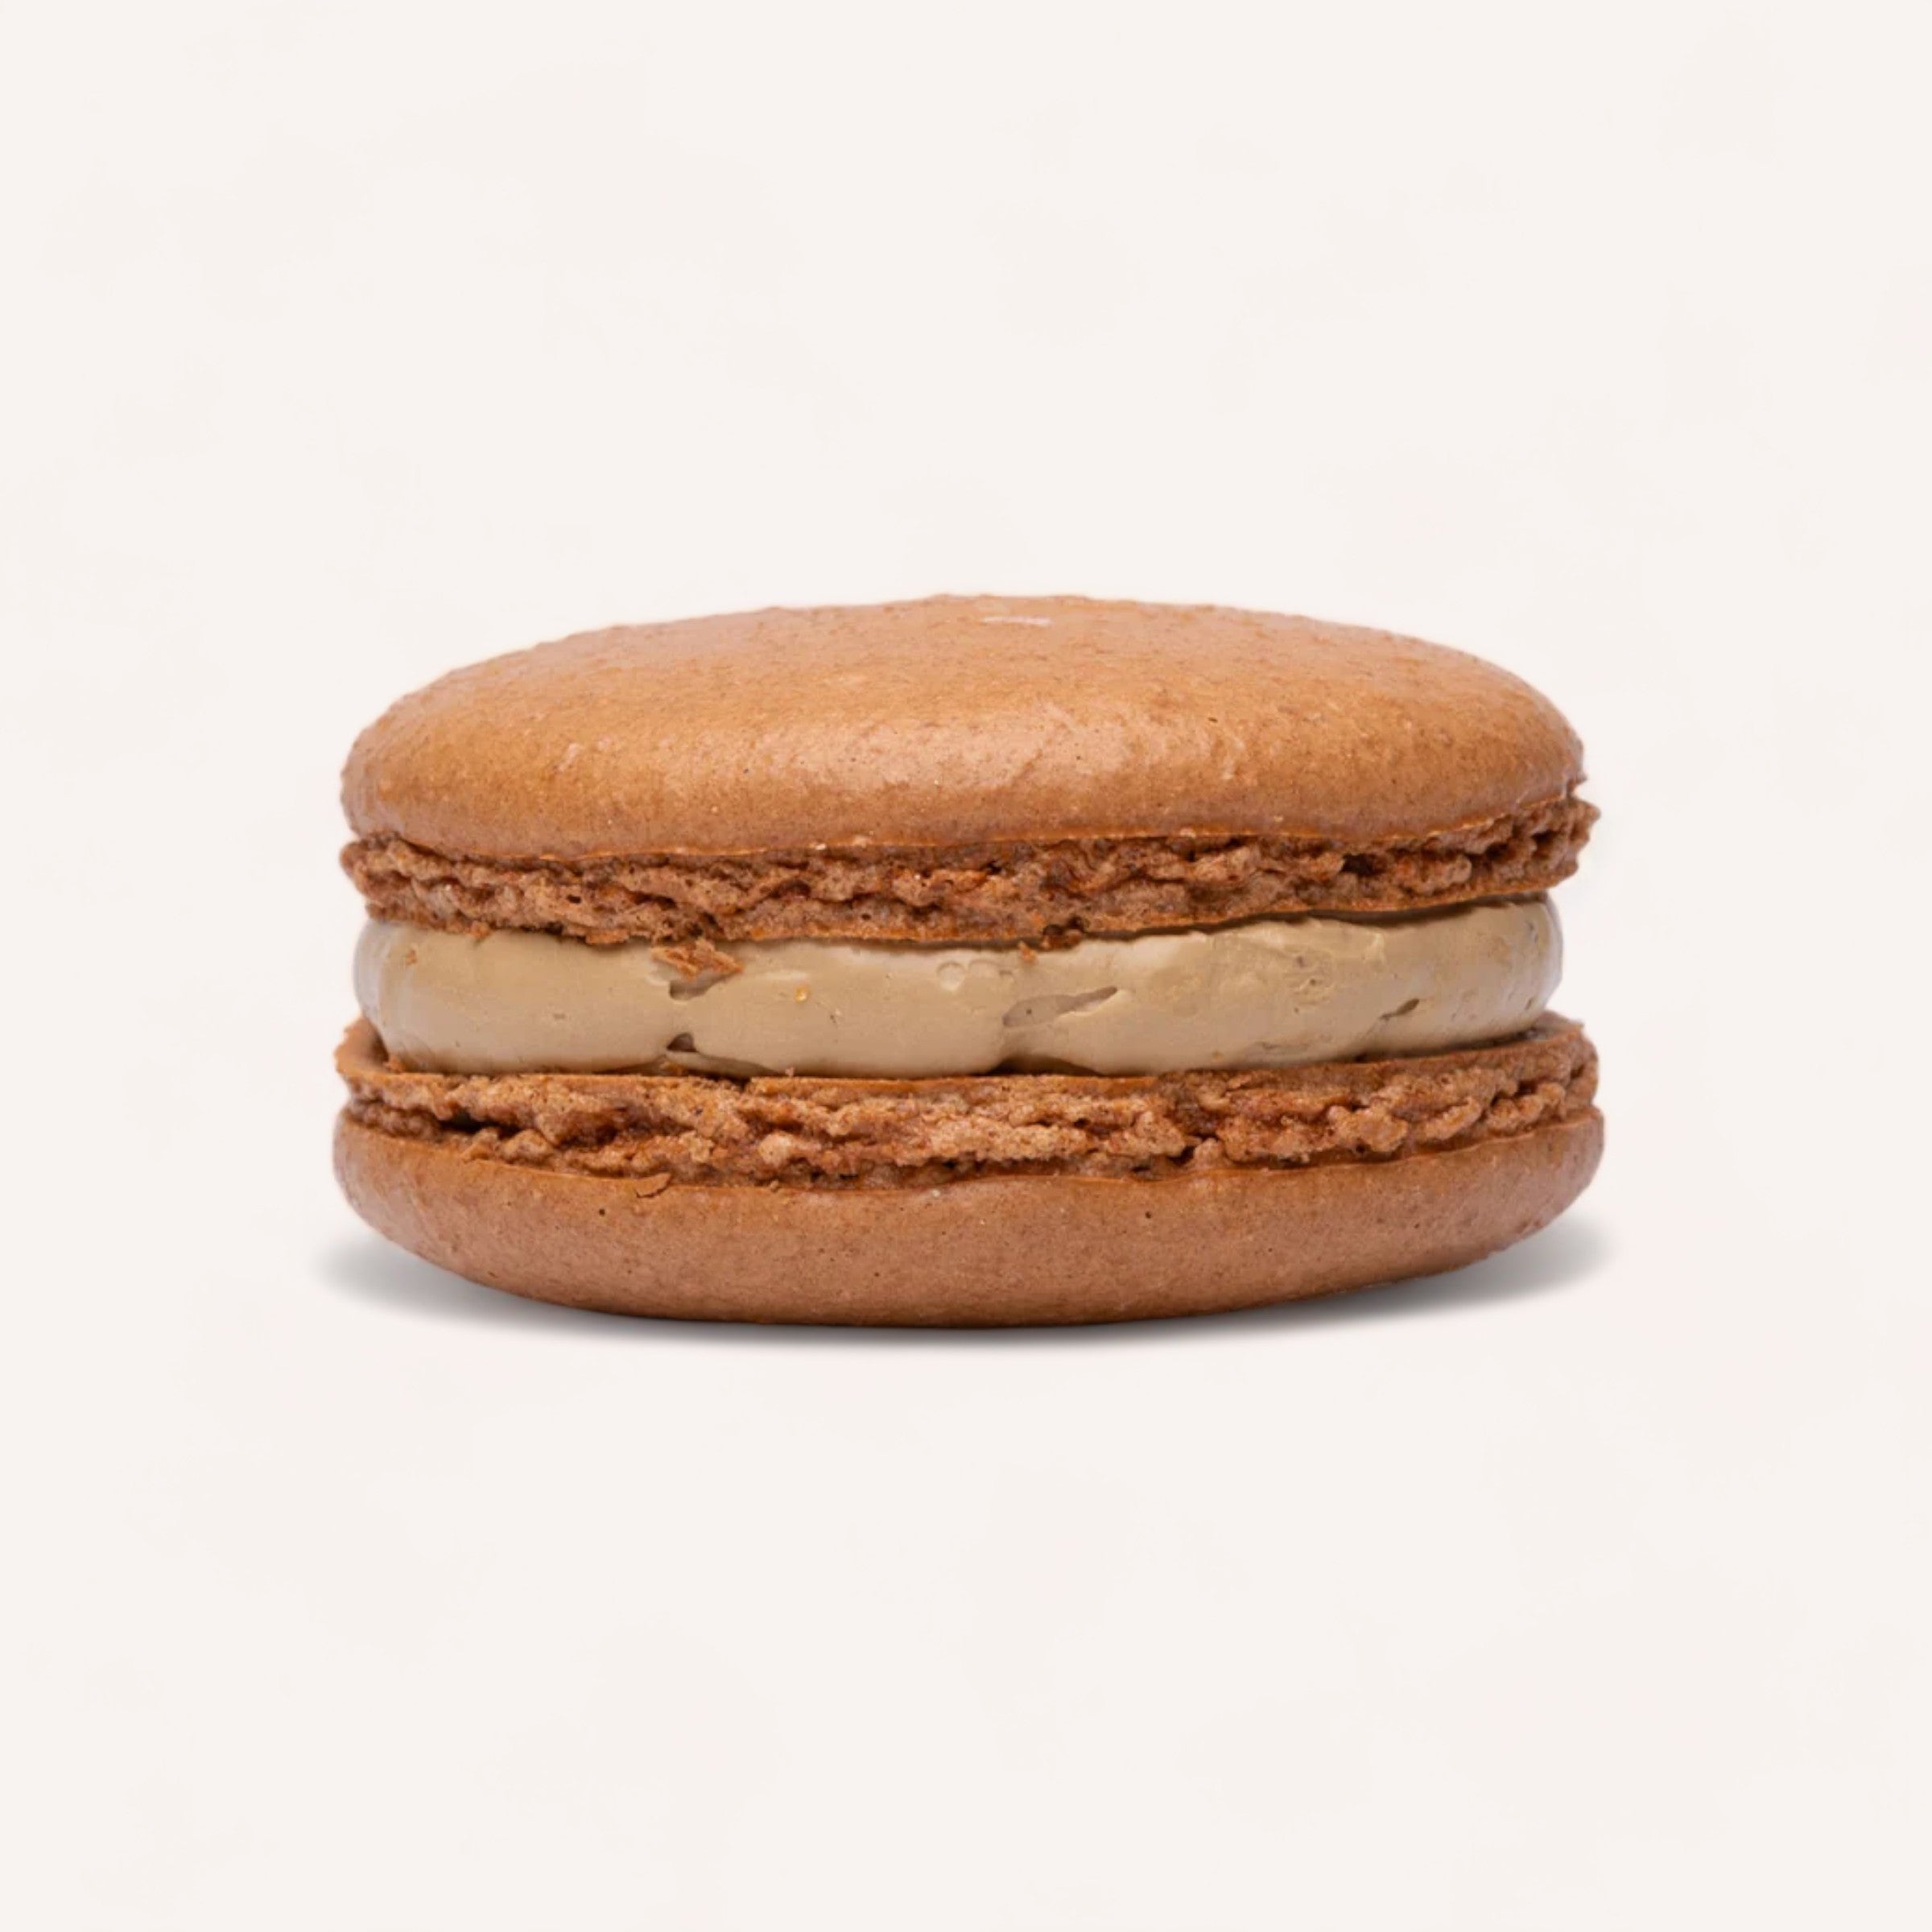 A single brown handmade Box of 6 Macarons by J'aime les Macarons with a creamy filling on a white background.